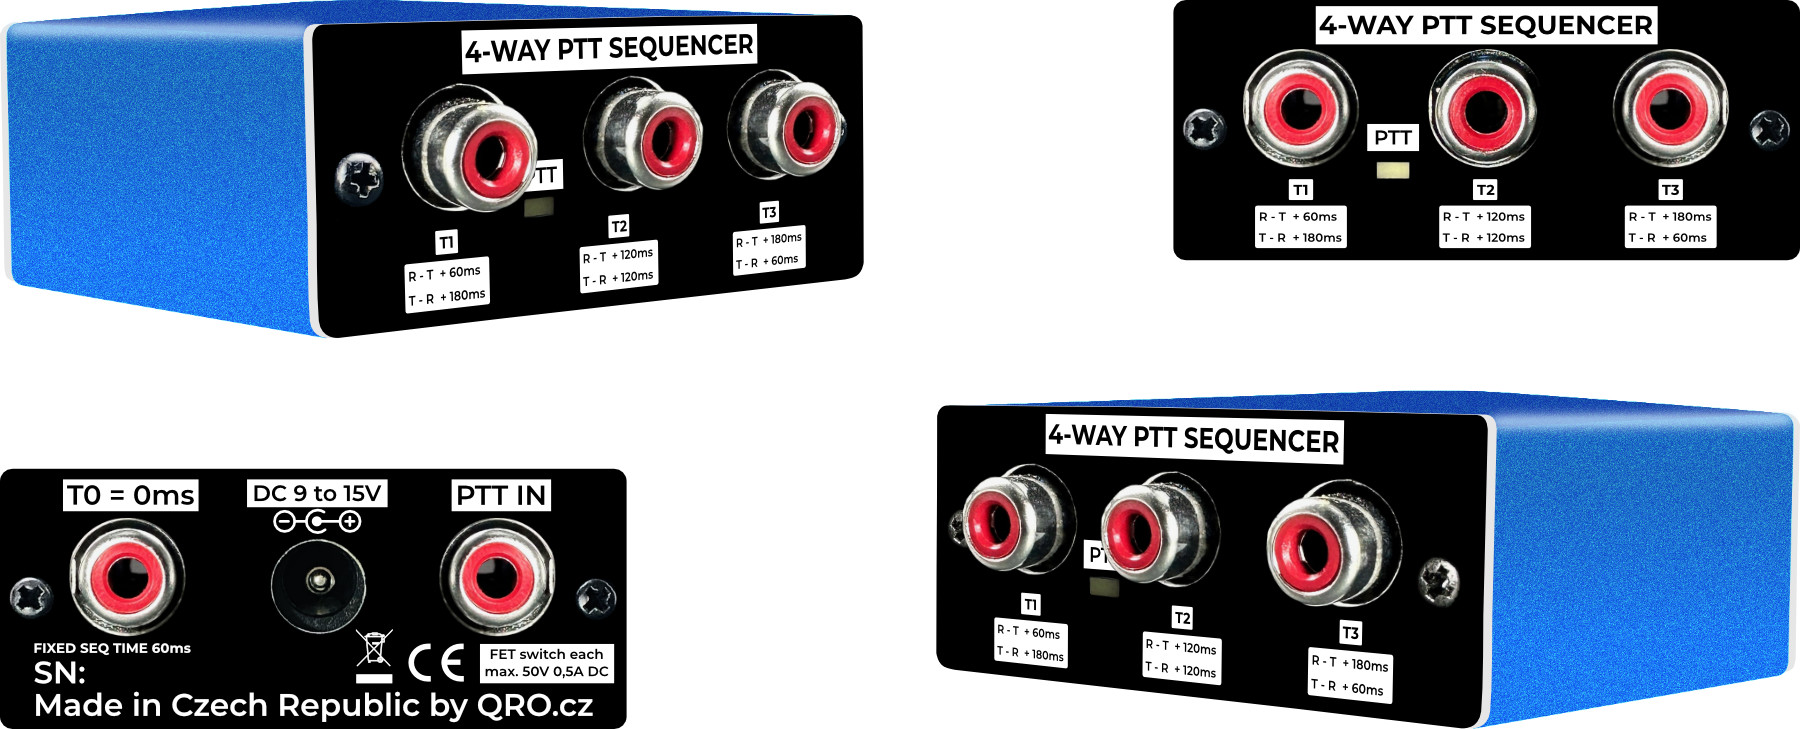 4-way ptt sequencer assembled in enclosure by qro.cz hamparts.shop